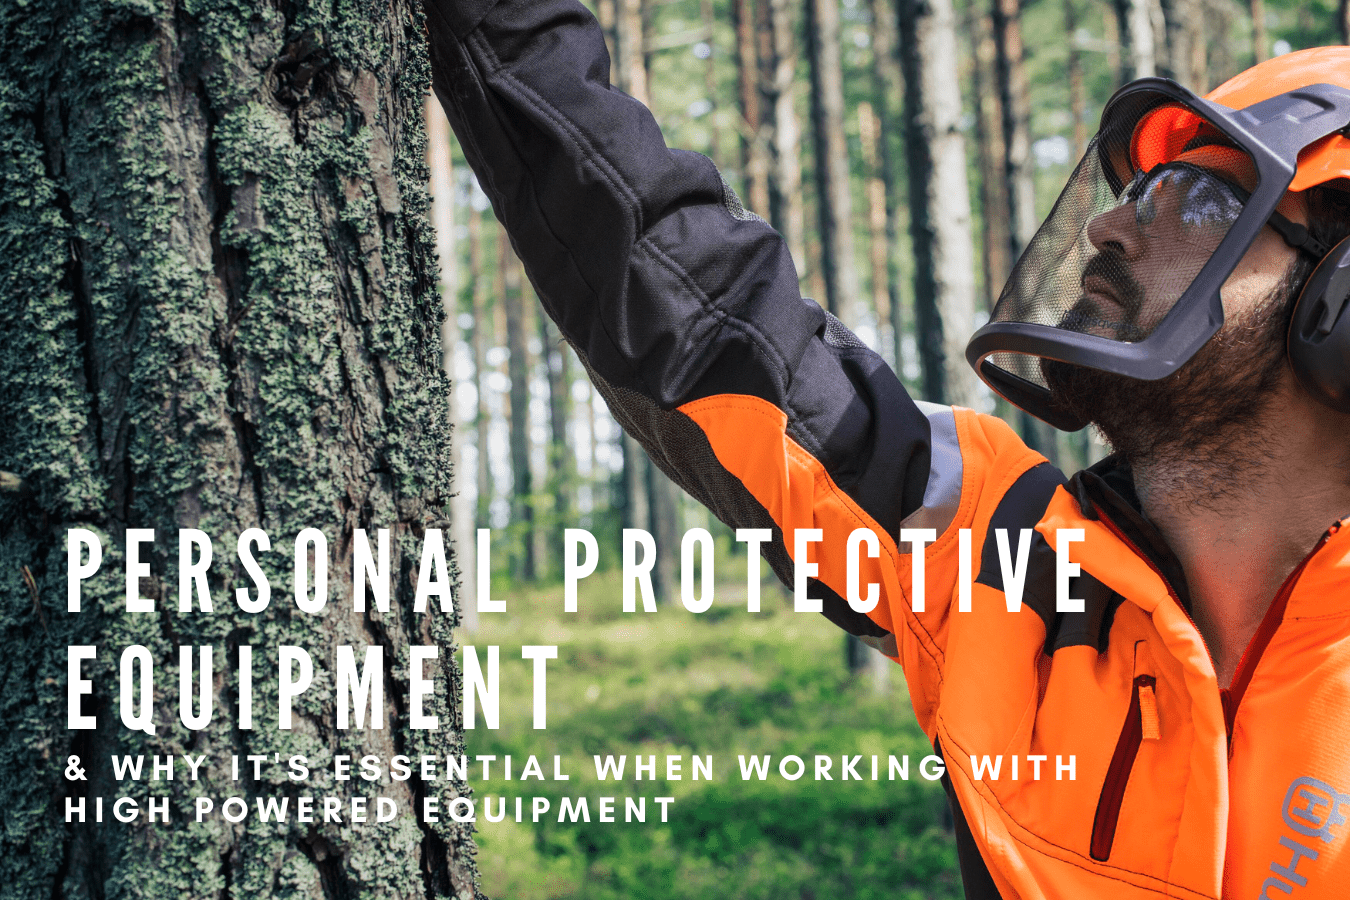 Personal Protective Equipment & Why it’s essential when working with high powered equipment.